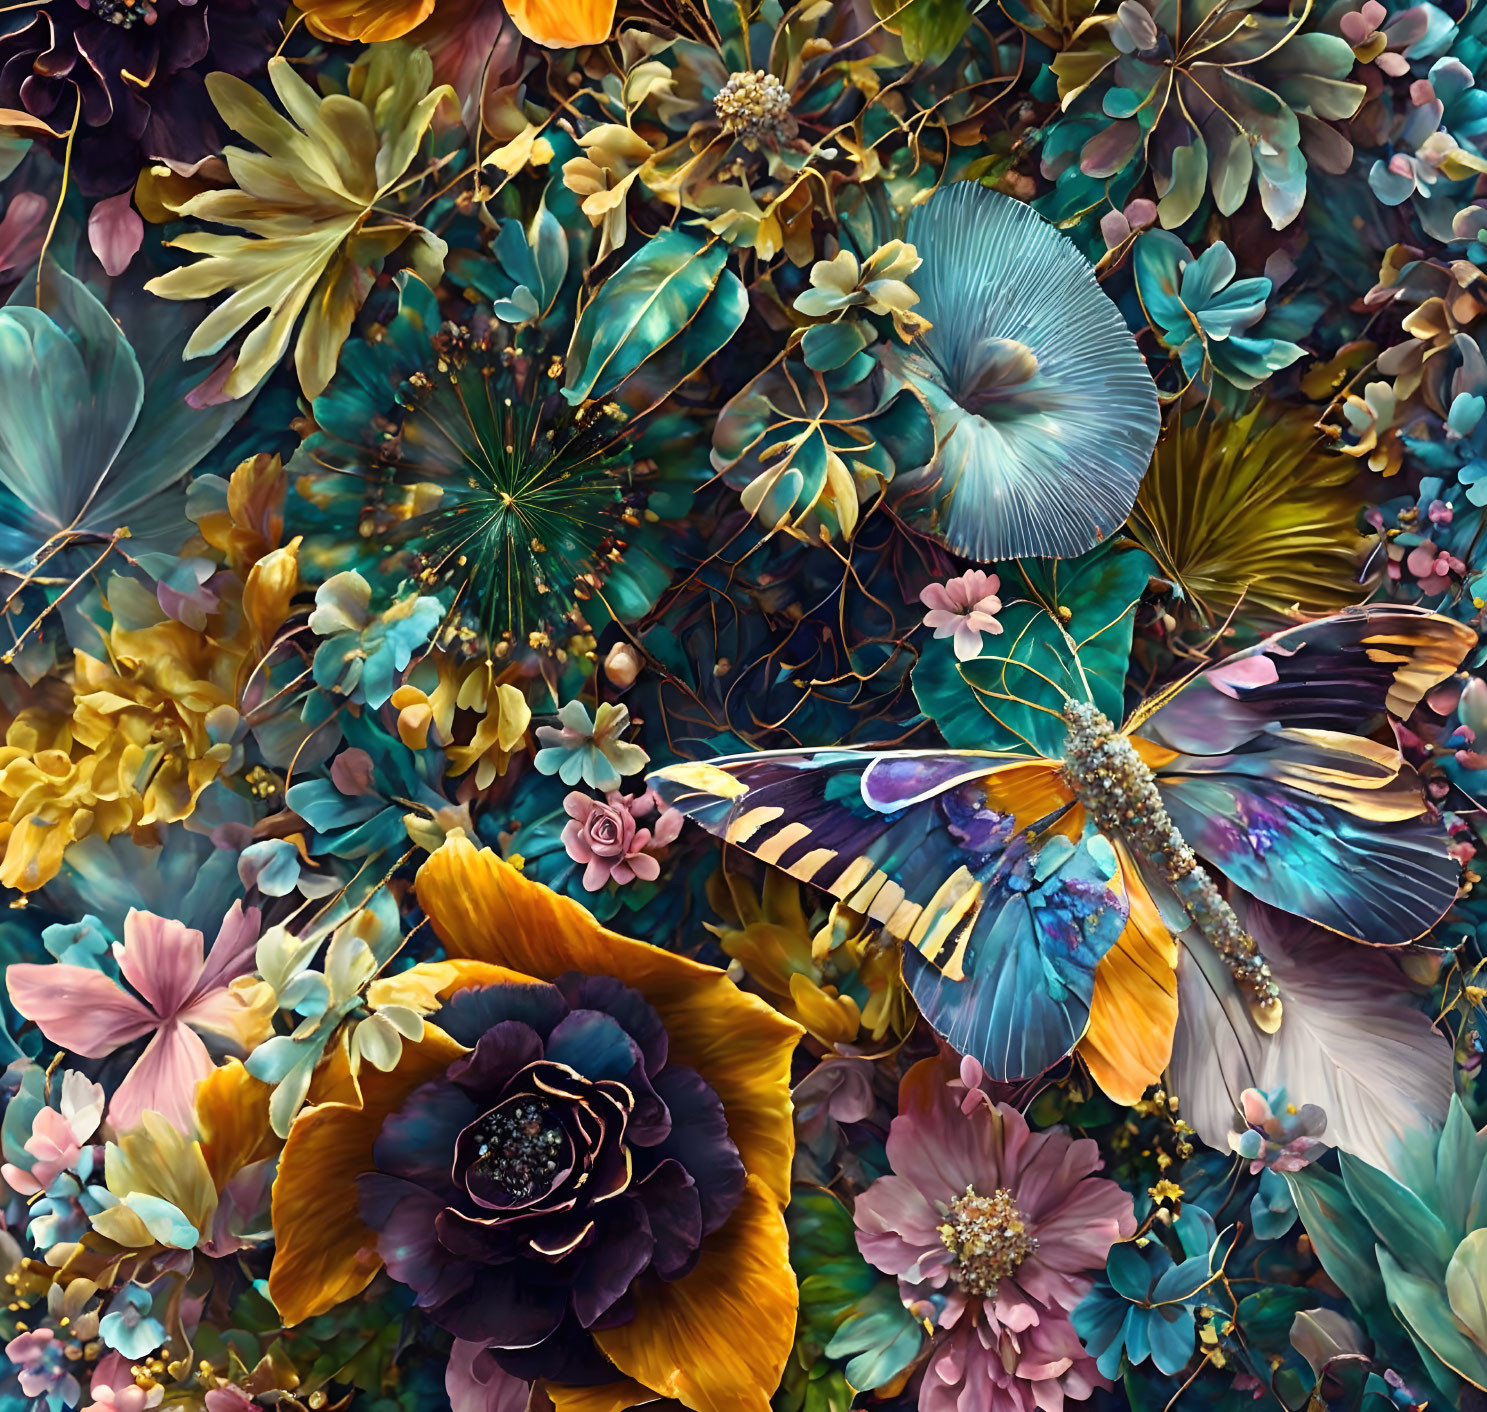 Colorful flowers and butterflies in dreamy digital art